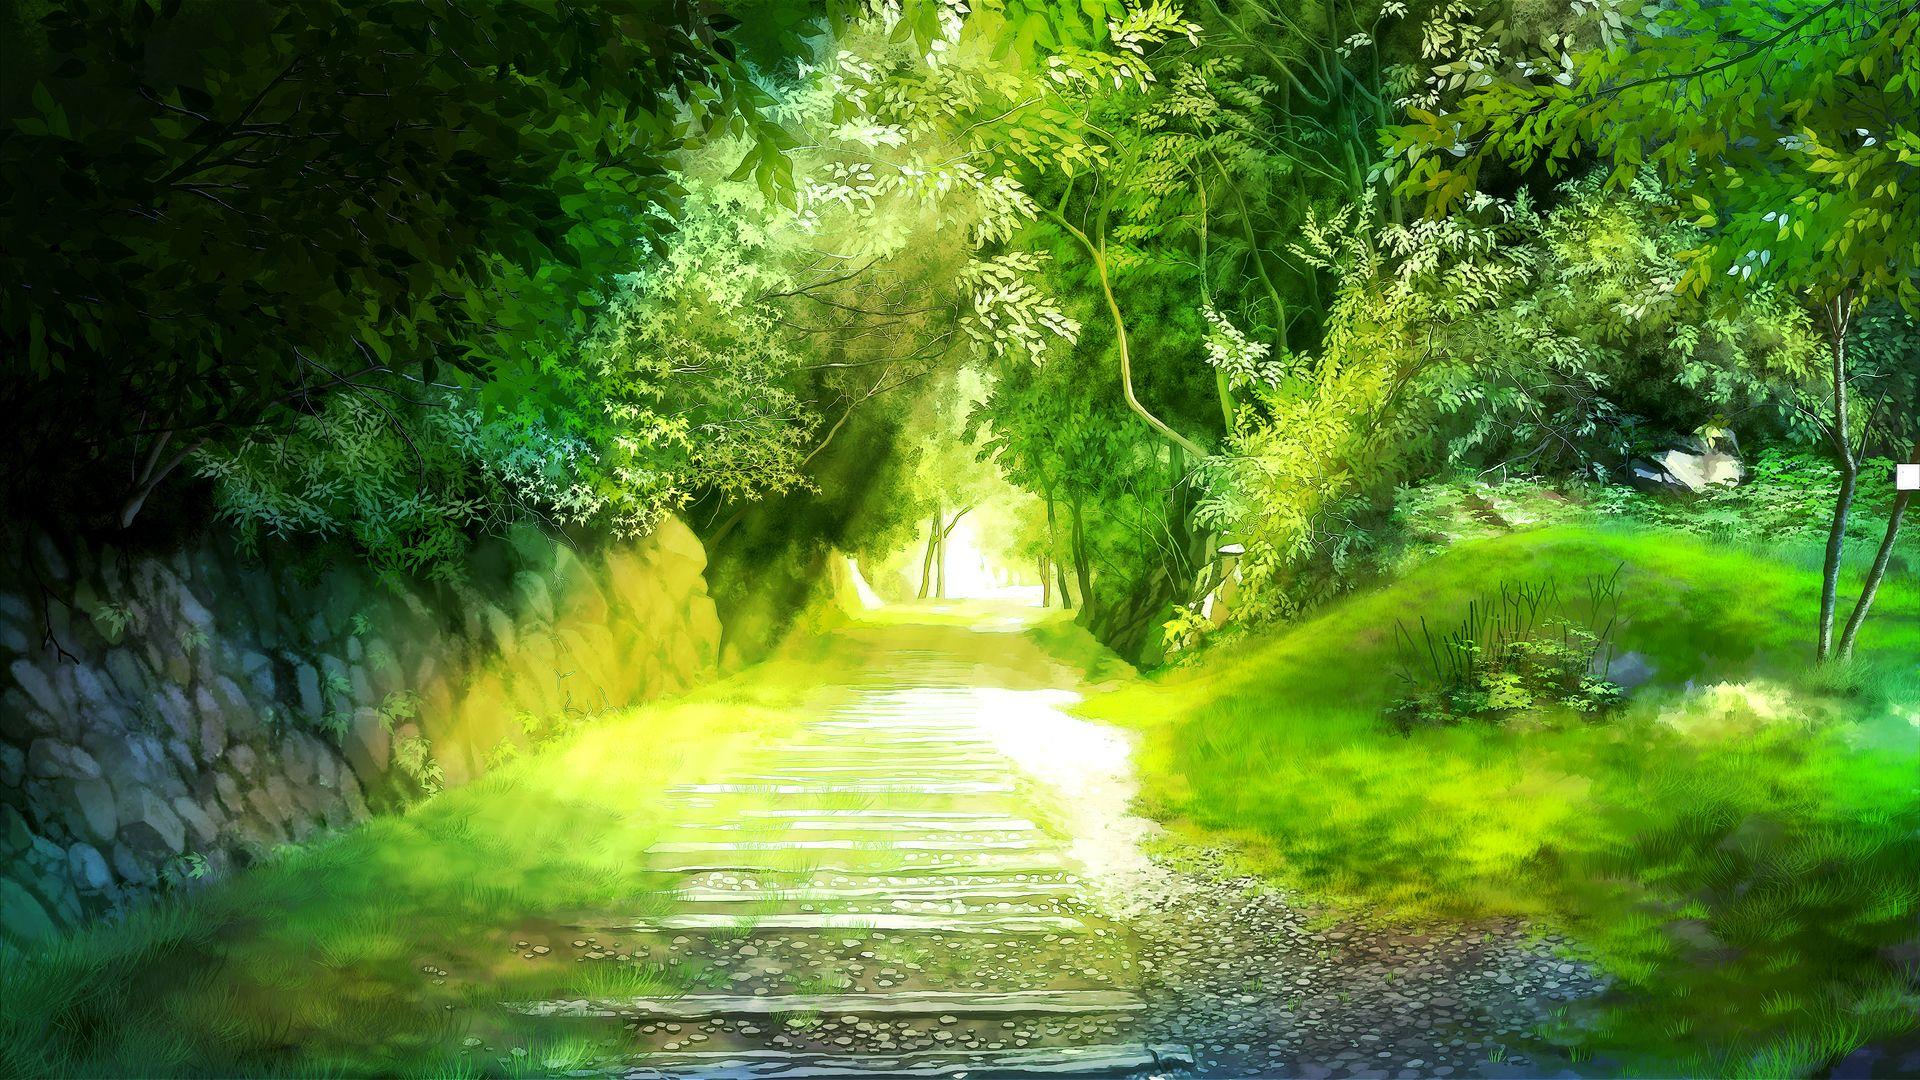 Nature Anime Scenery Background Wallpaper. Anime scenery, Scenery background, Scenery